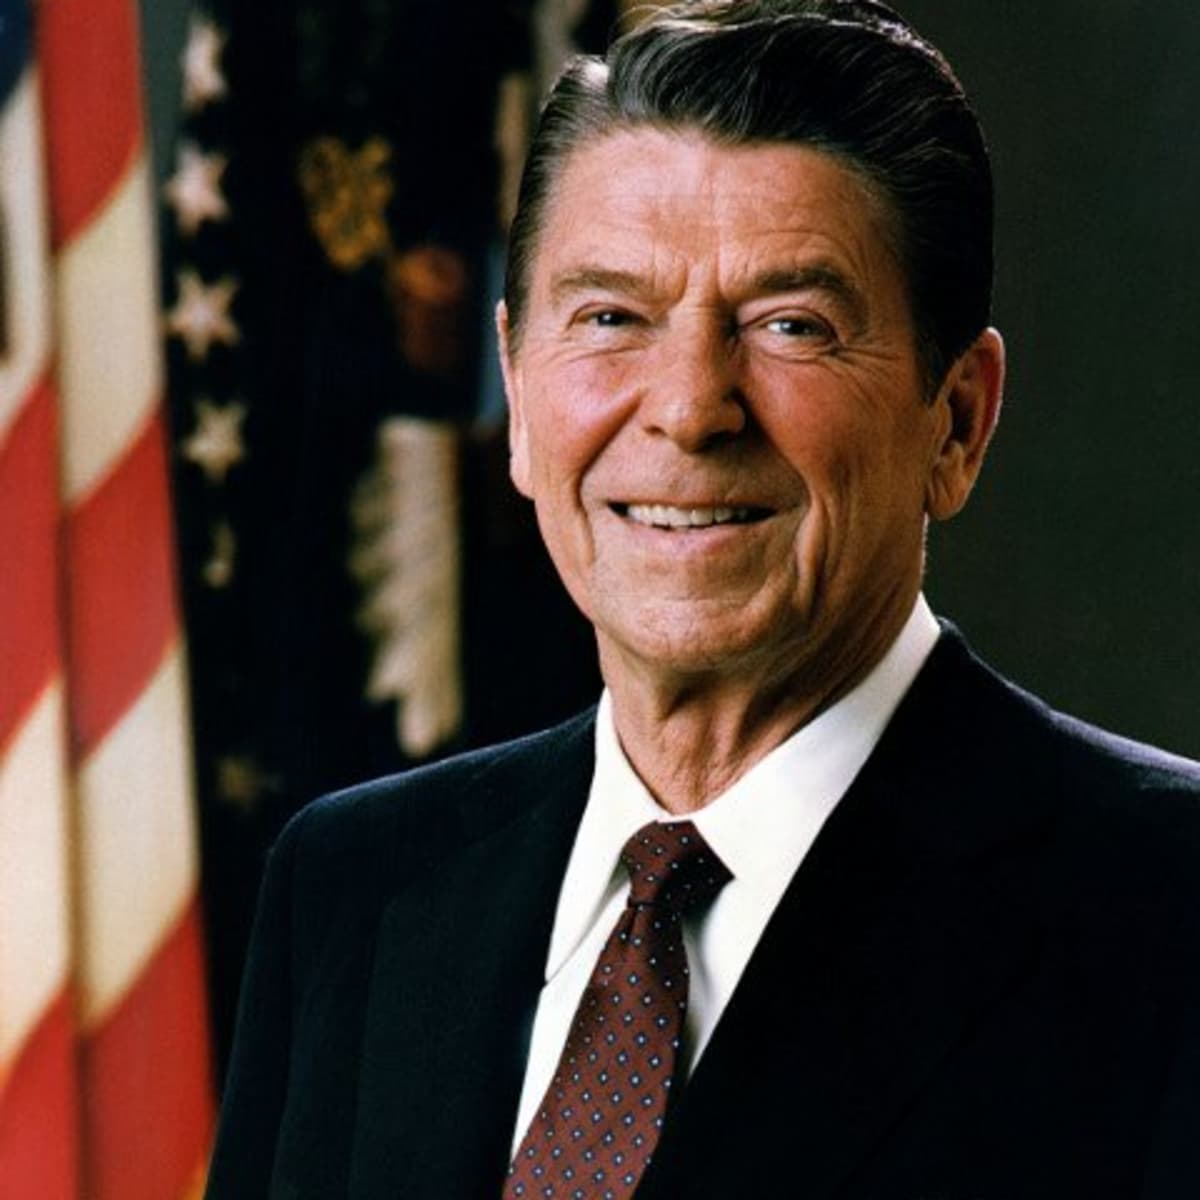 21 Reasons Why Ronald Reagan Was a Terrible President - Soapboxie